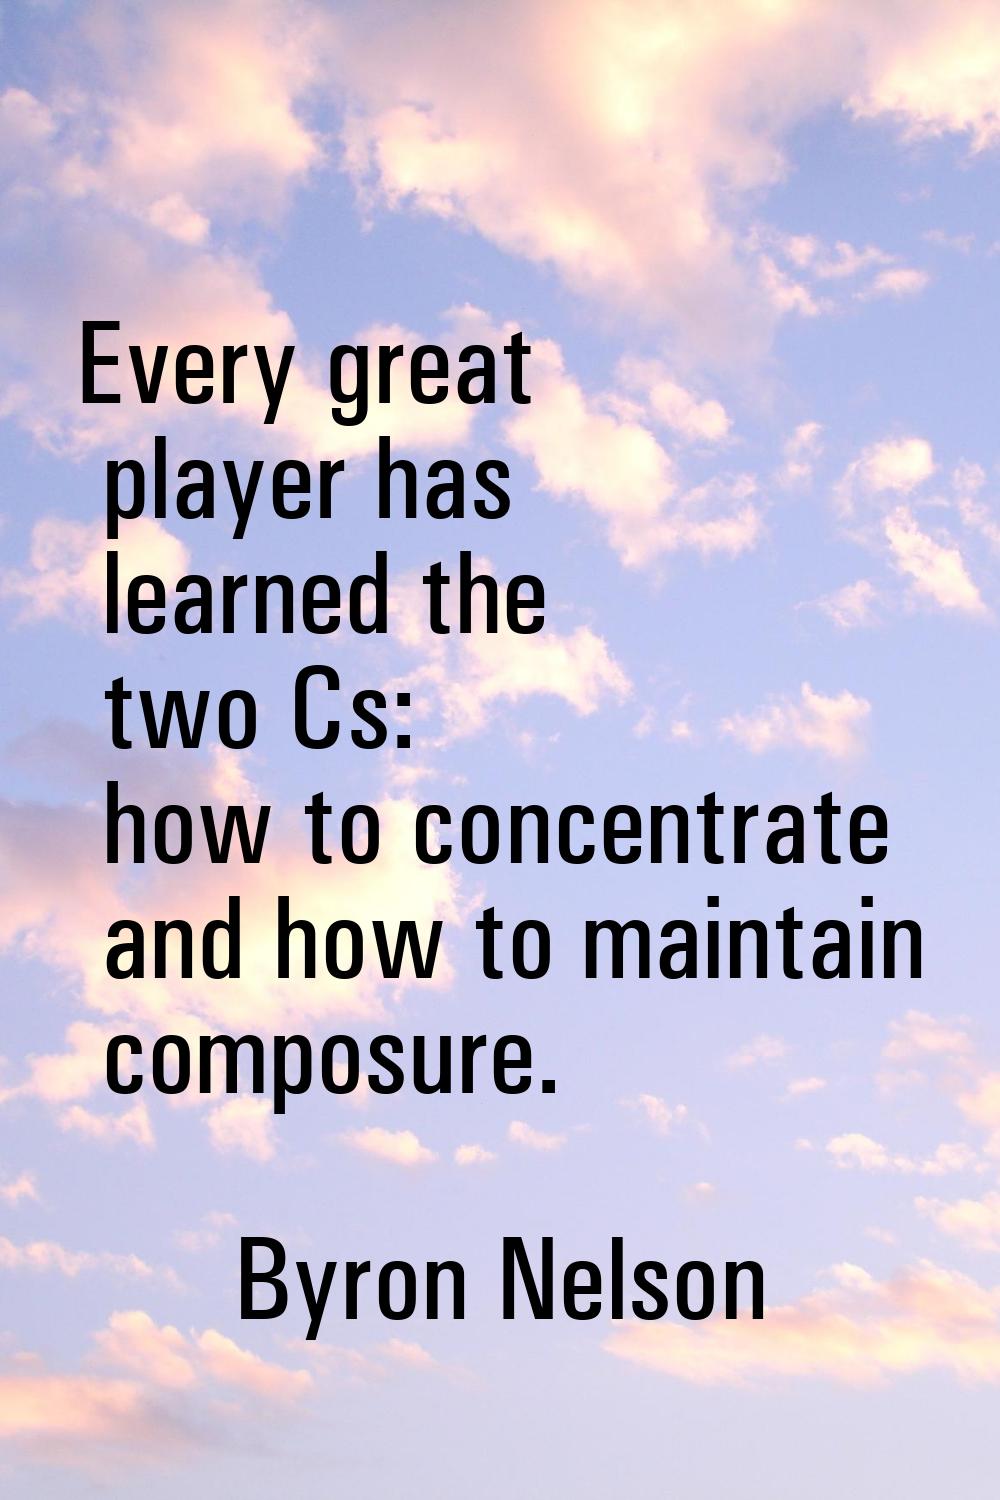 Every great player has learned the two Cs: how to concentrate and how to maintain composure.